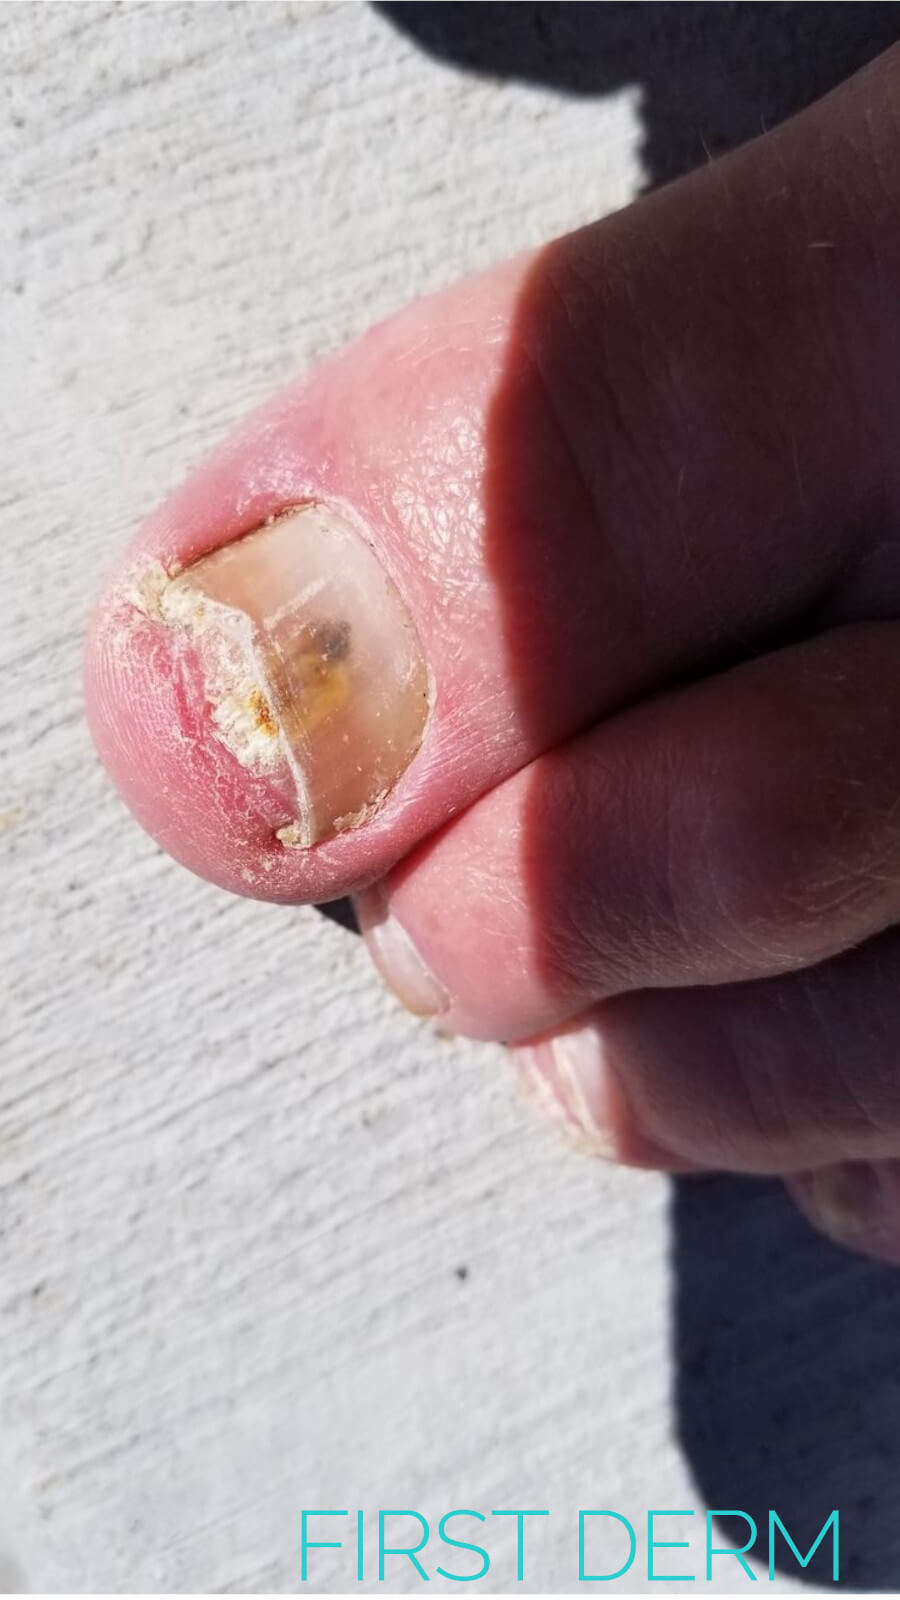 Hangnail: Causes, Symptoms, and Treatment